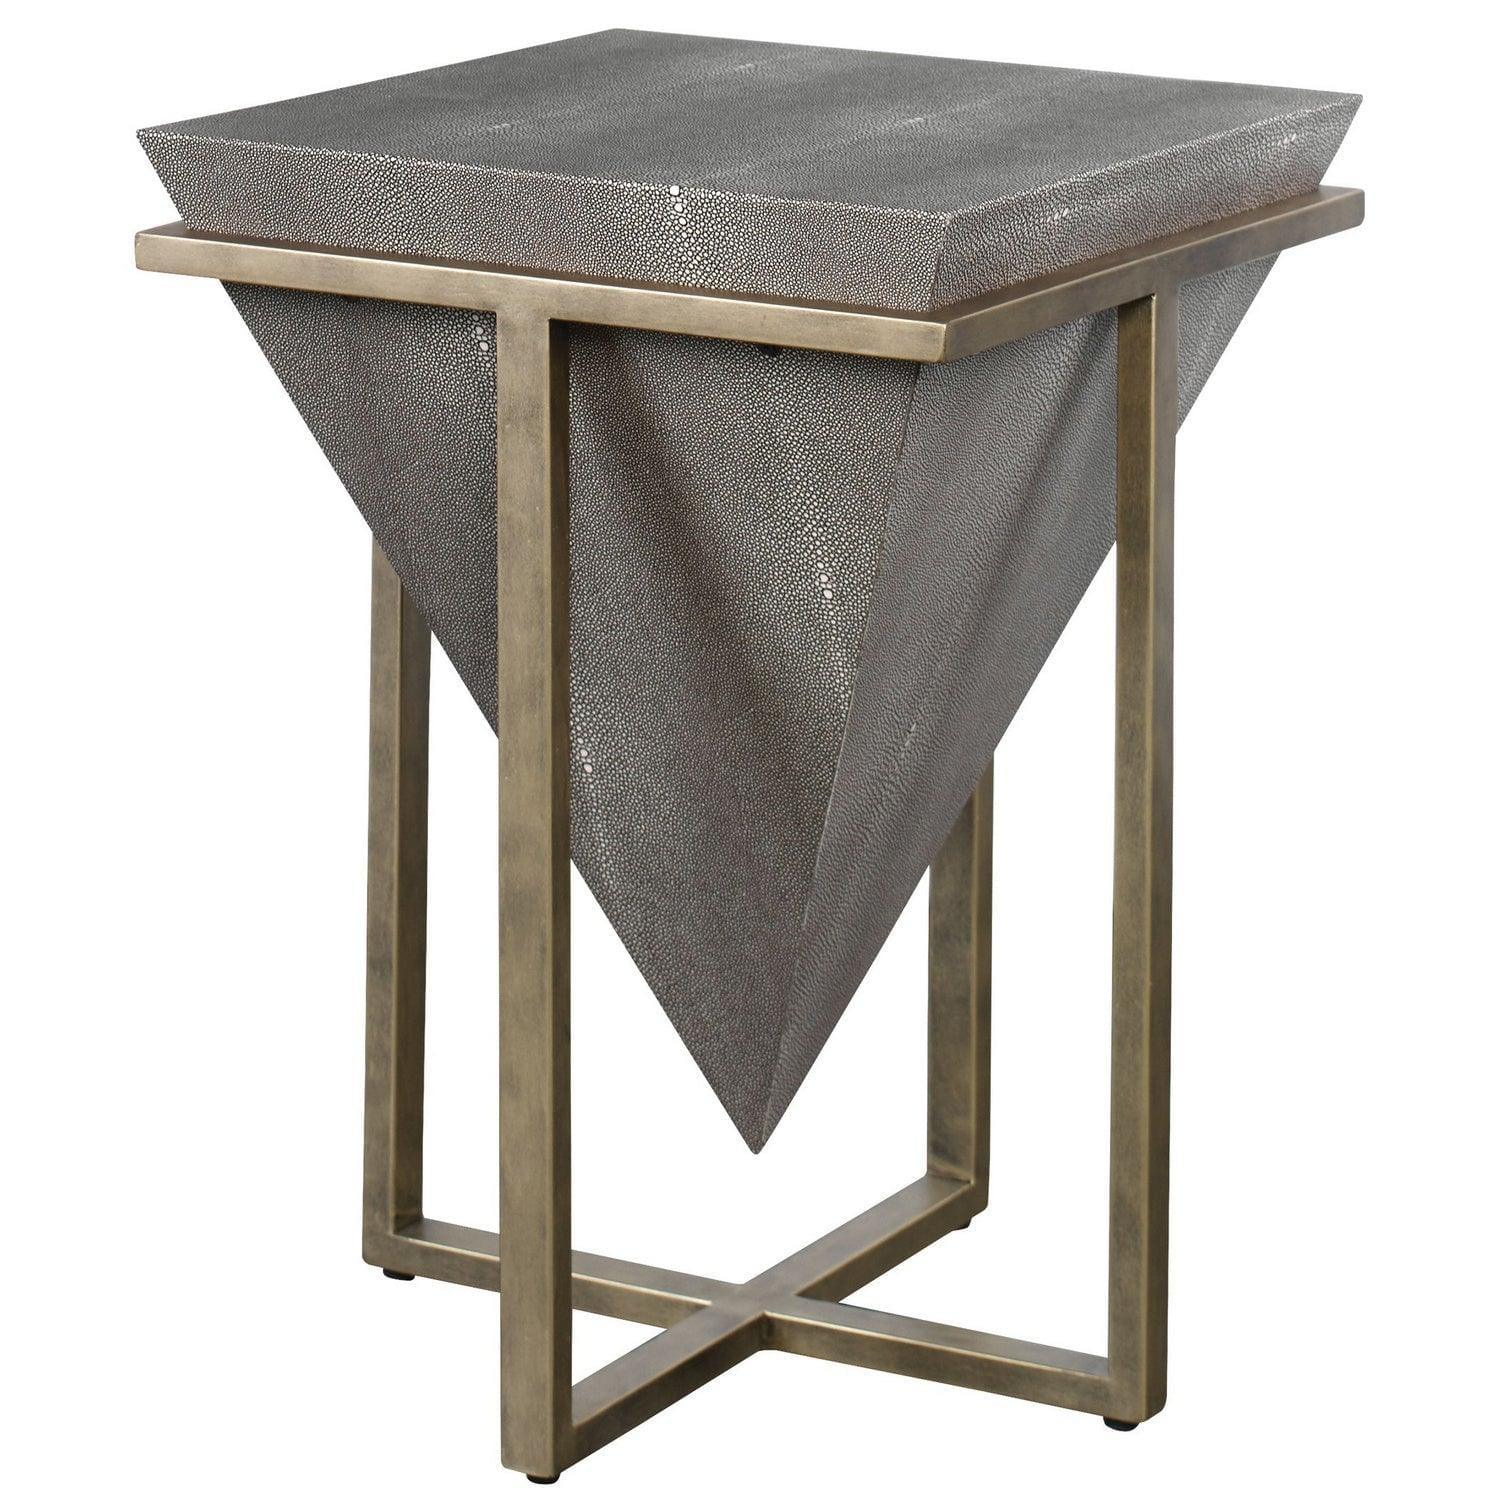 The Uttermost - Bertrand Accent Table - 25123 | Montreal Lighting & Hardware